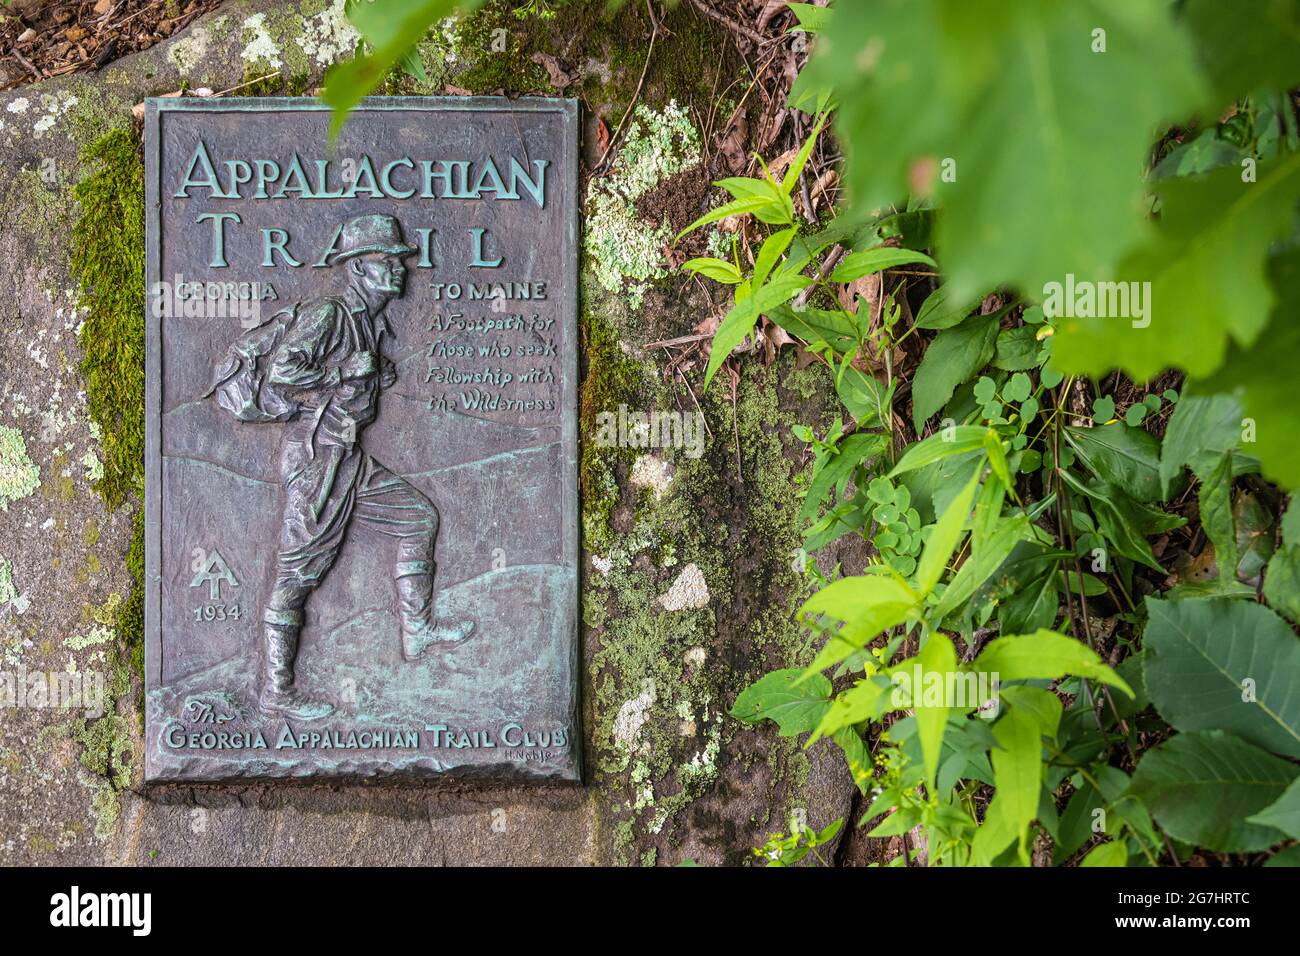 Appalachian Trail trailside bronze plaque at Neels Gap on the Eastern side of Blood Mountain near Blairsville, Georgia. (USA) Stock Photo